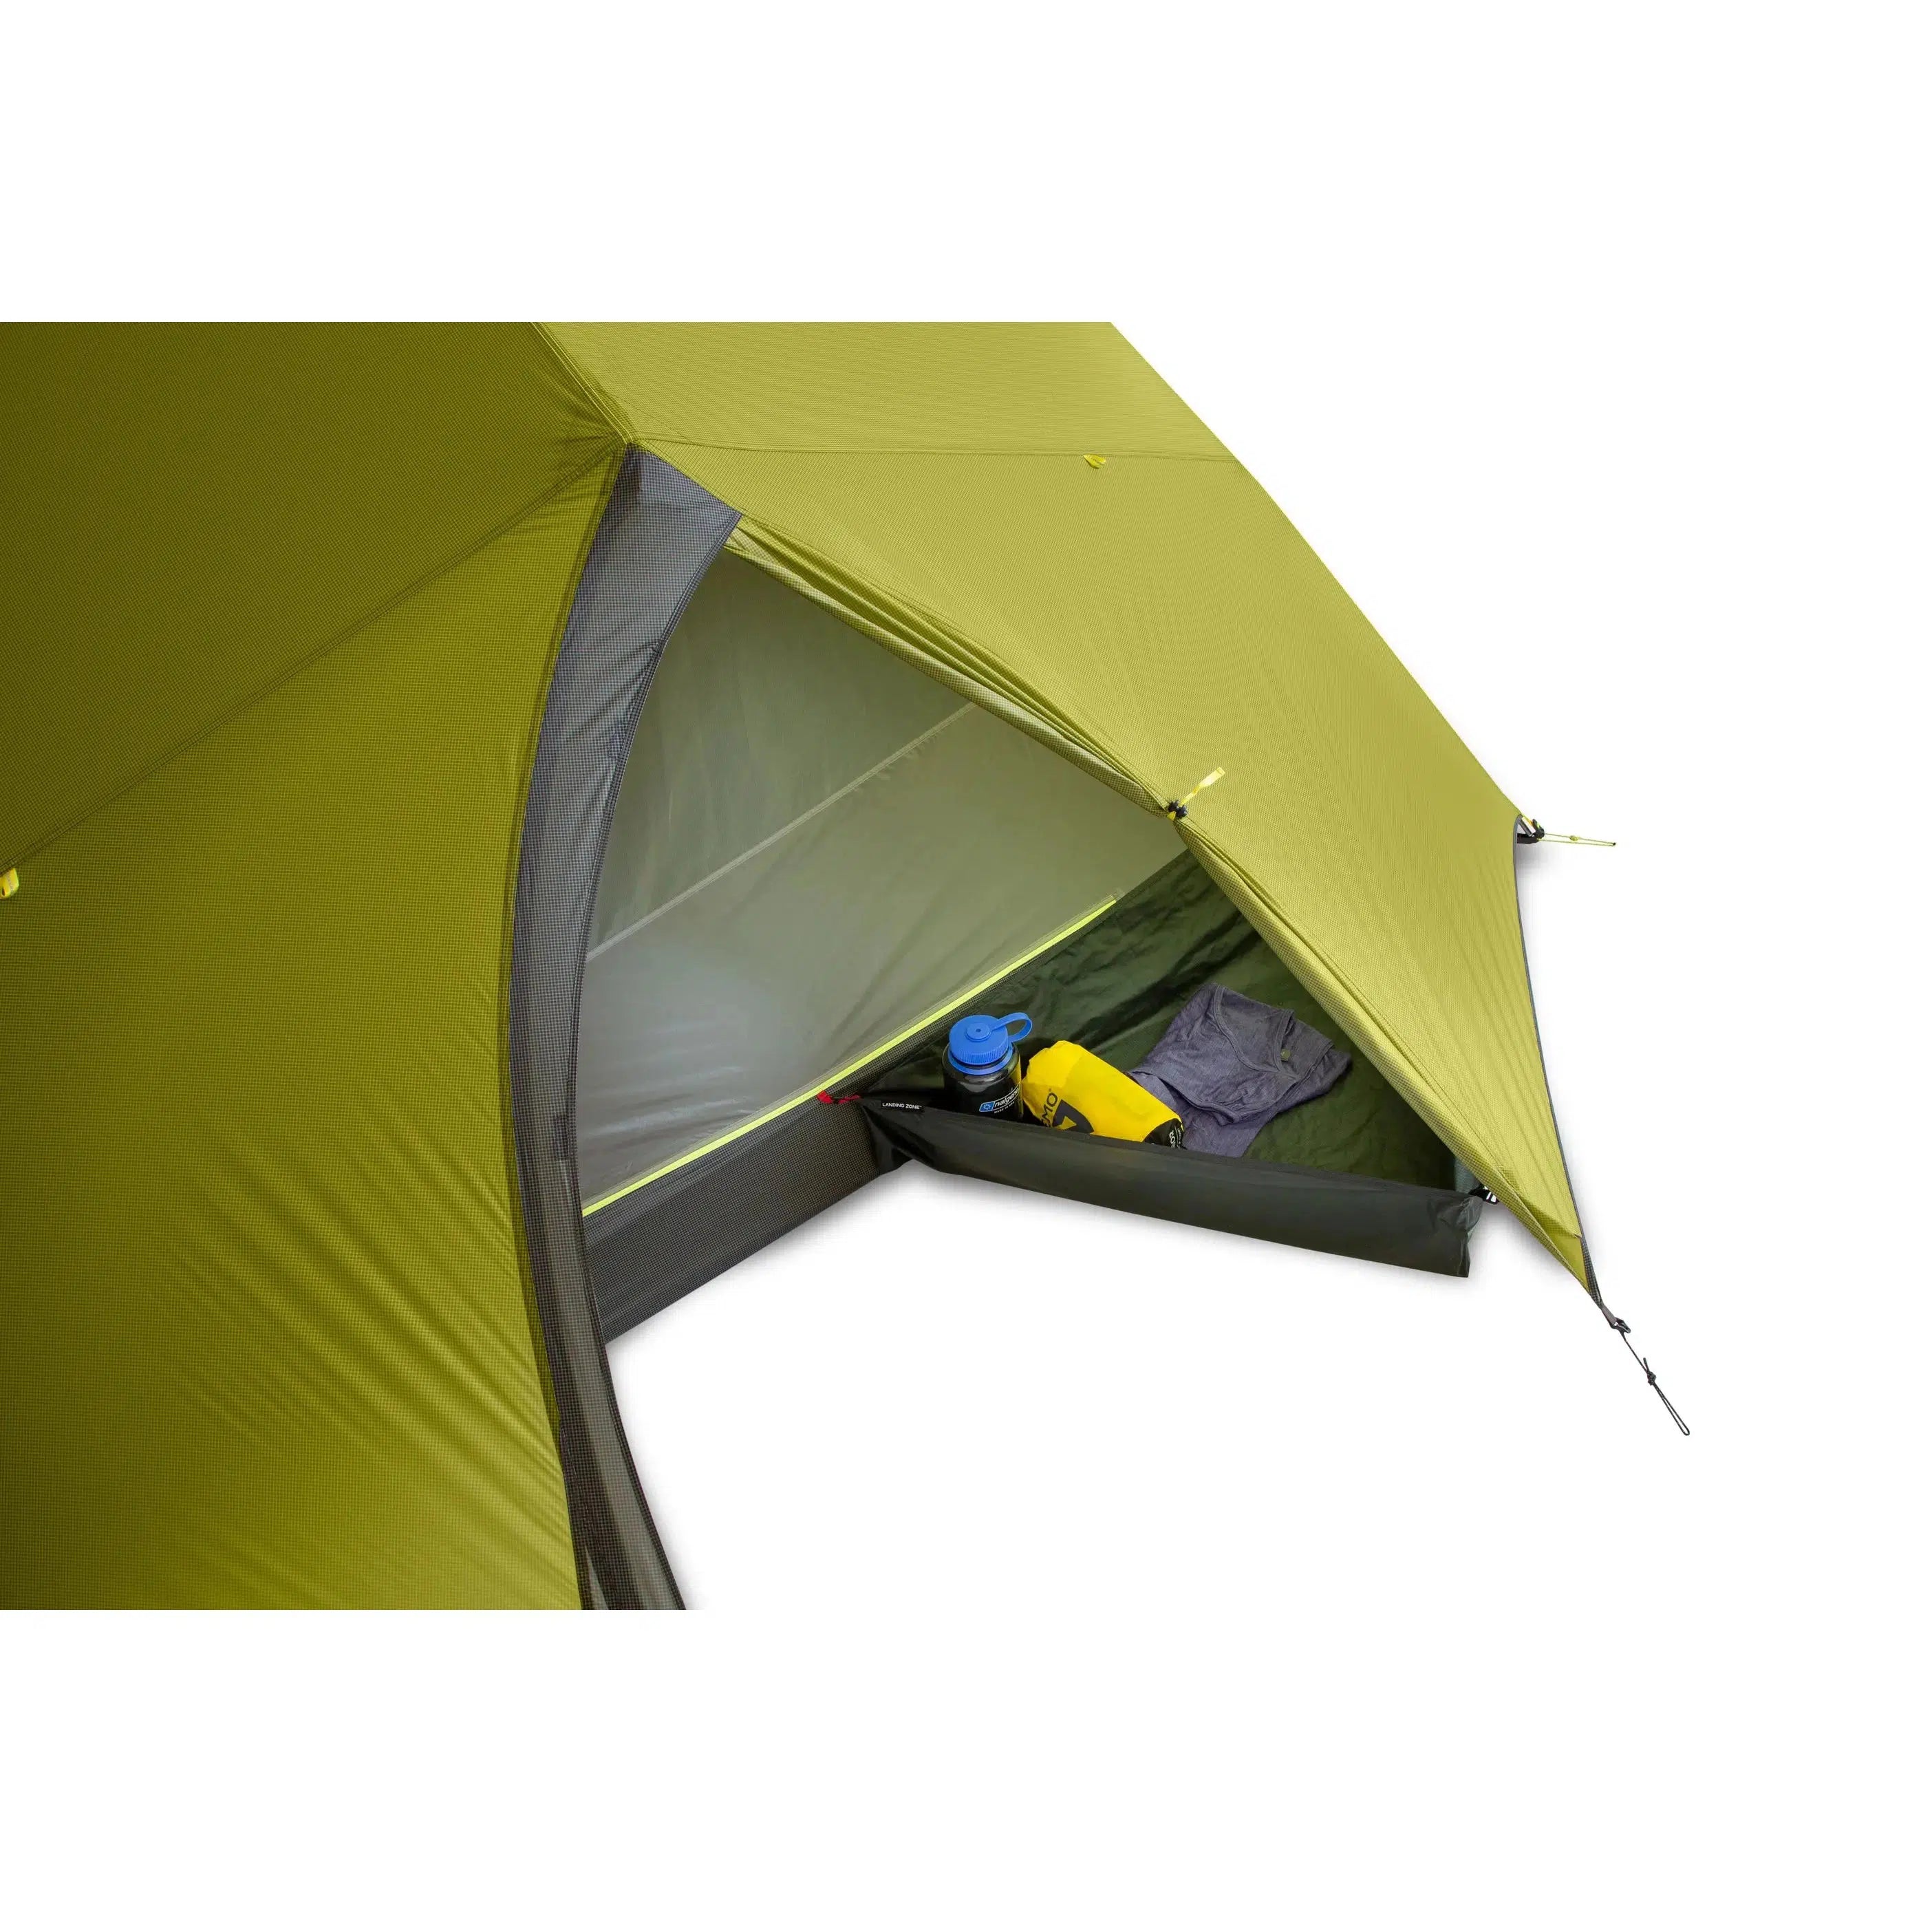 NEMO Dagger OSMO Lightweight Backpacking Tent 2 Person